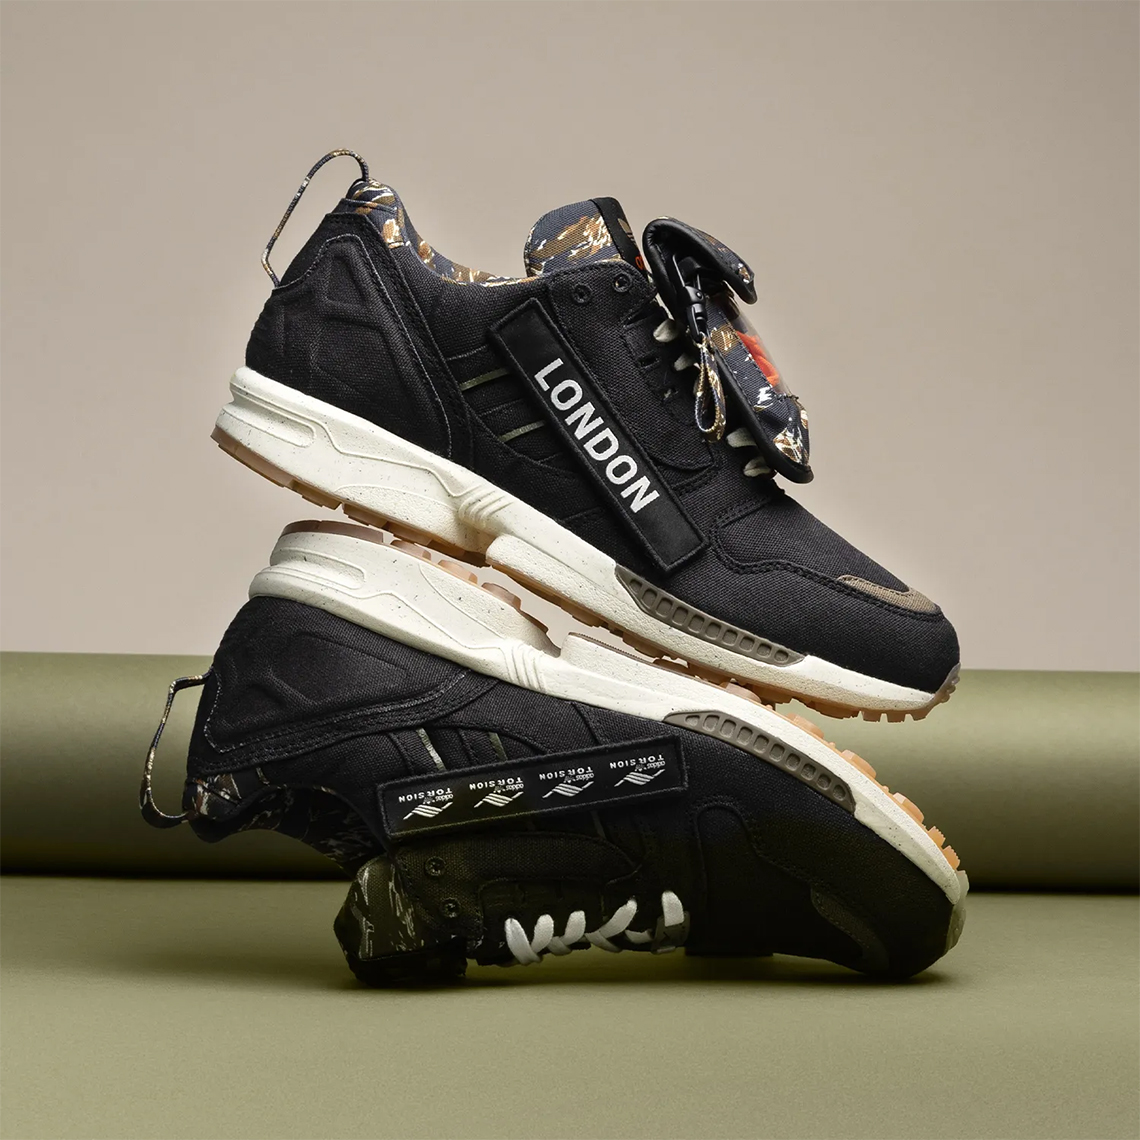 adidas ZX 8000 Out There S42592 Release Date | SneakerNews.com